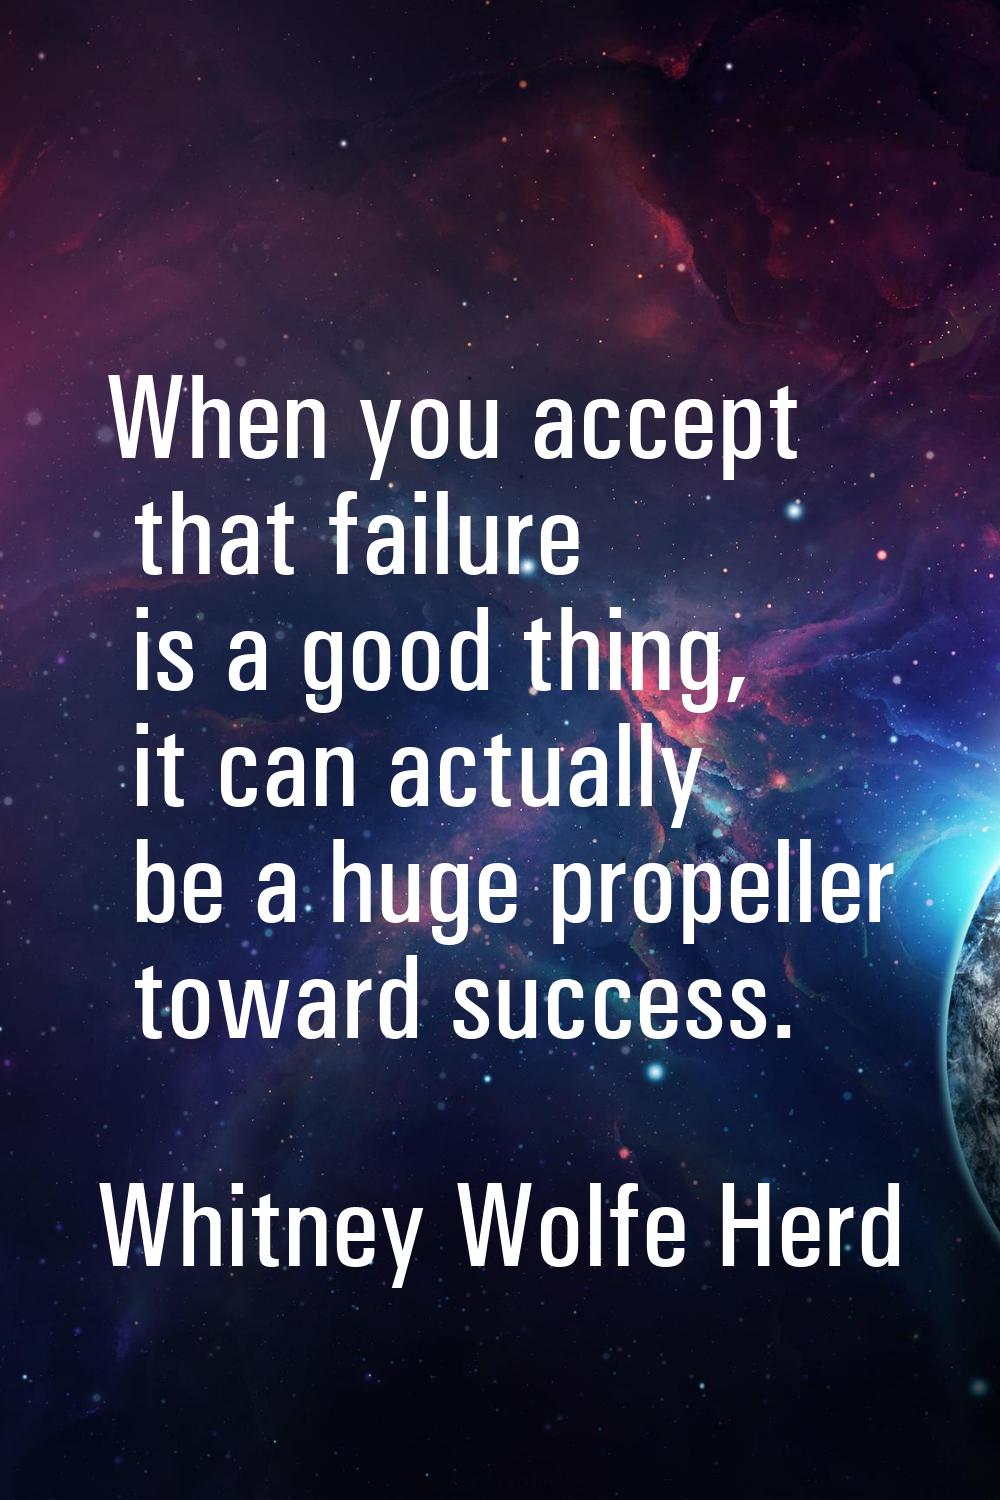 When you accept that failure is a good thing, it can actually be a huge propeller toward success.